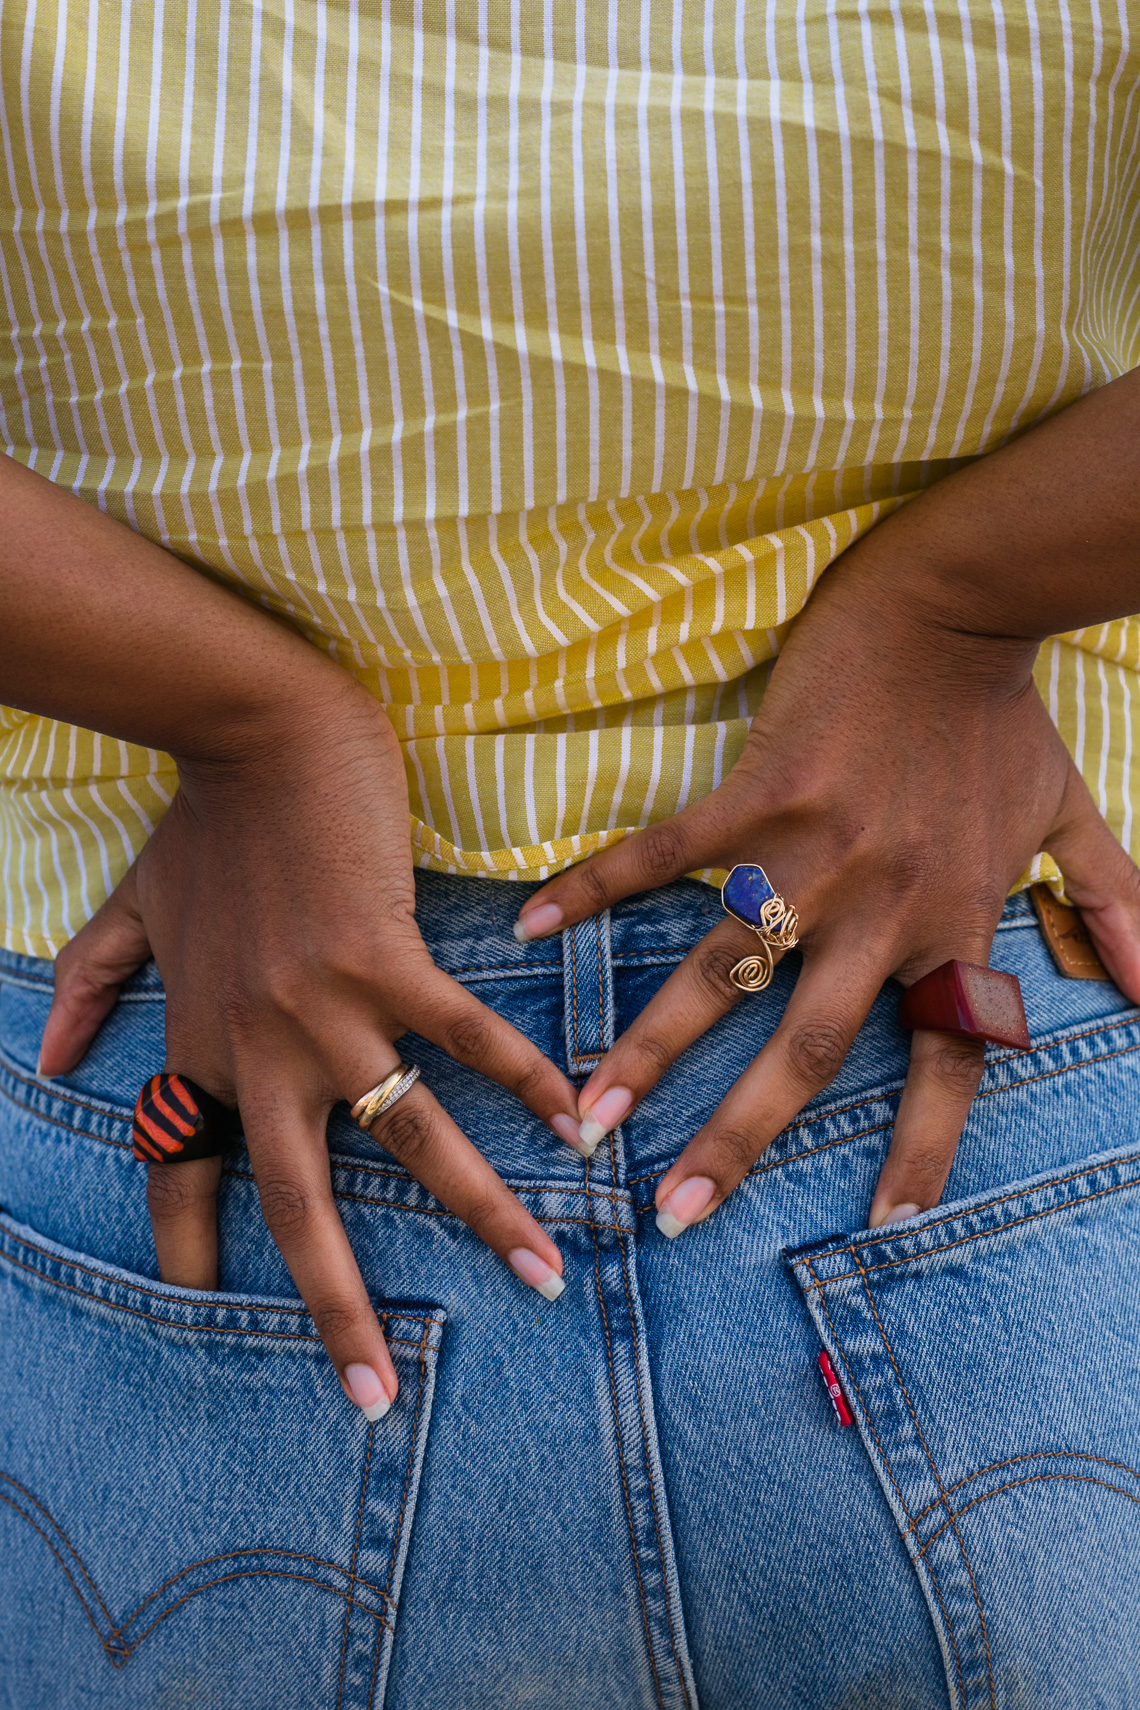 rings-levis-summer outfit-h&m-jeans-denim-yellow shirt